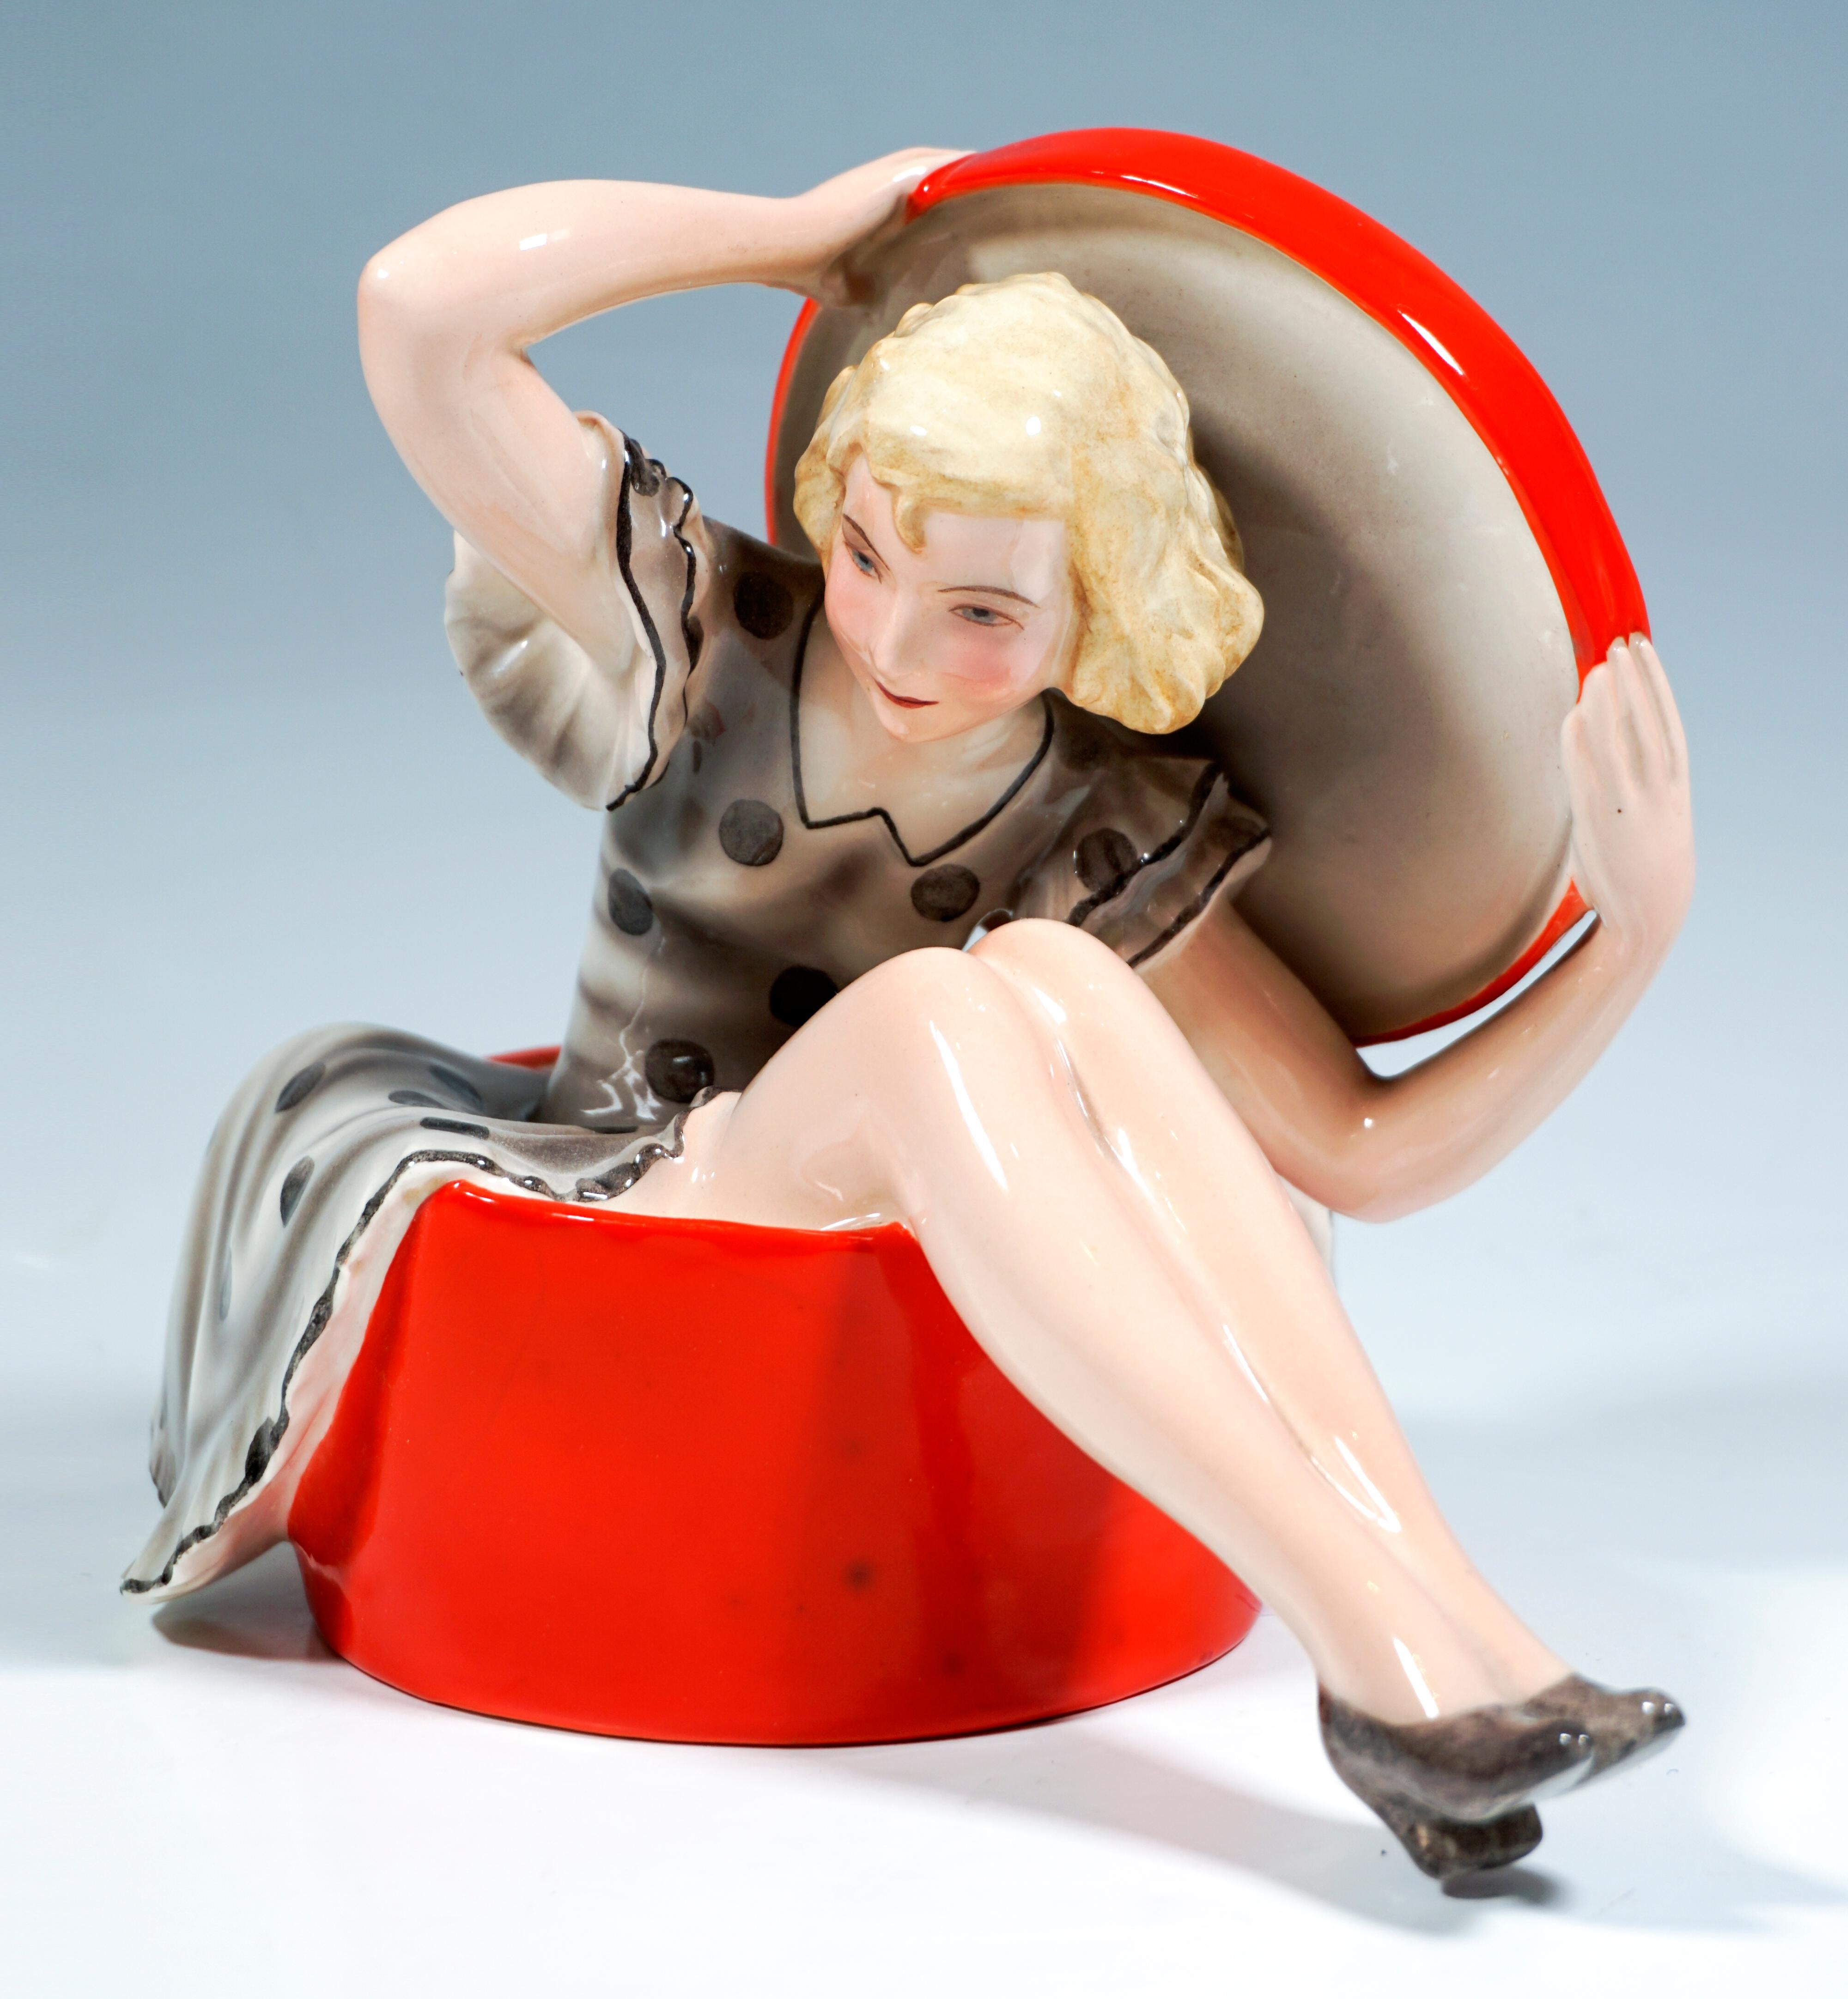 Rare Goldscheider Art Déco Ceramic Figurine.
Blond, curly-haired young lady in a light-grey, polka-dot summer dress sitting in a large, red hat box, leaning slightly forward, holding the lid in both hands behind her.
Without base, artist's